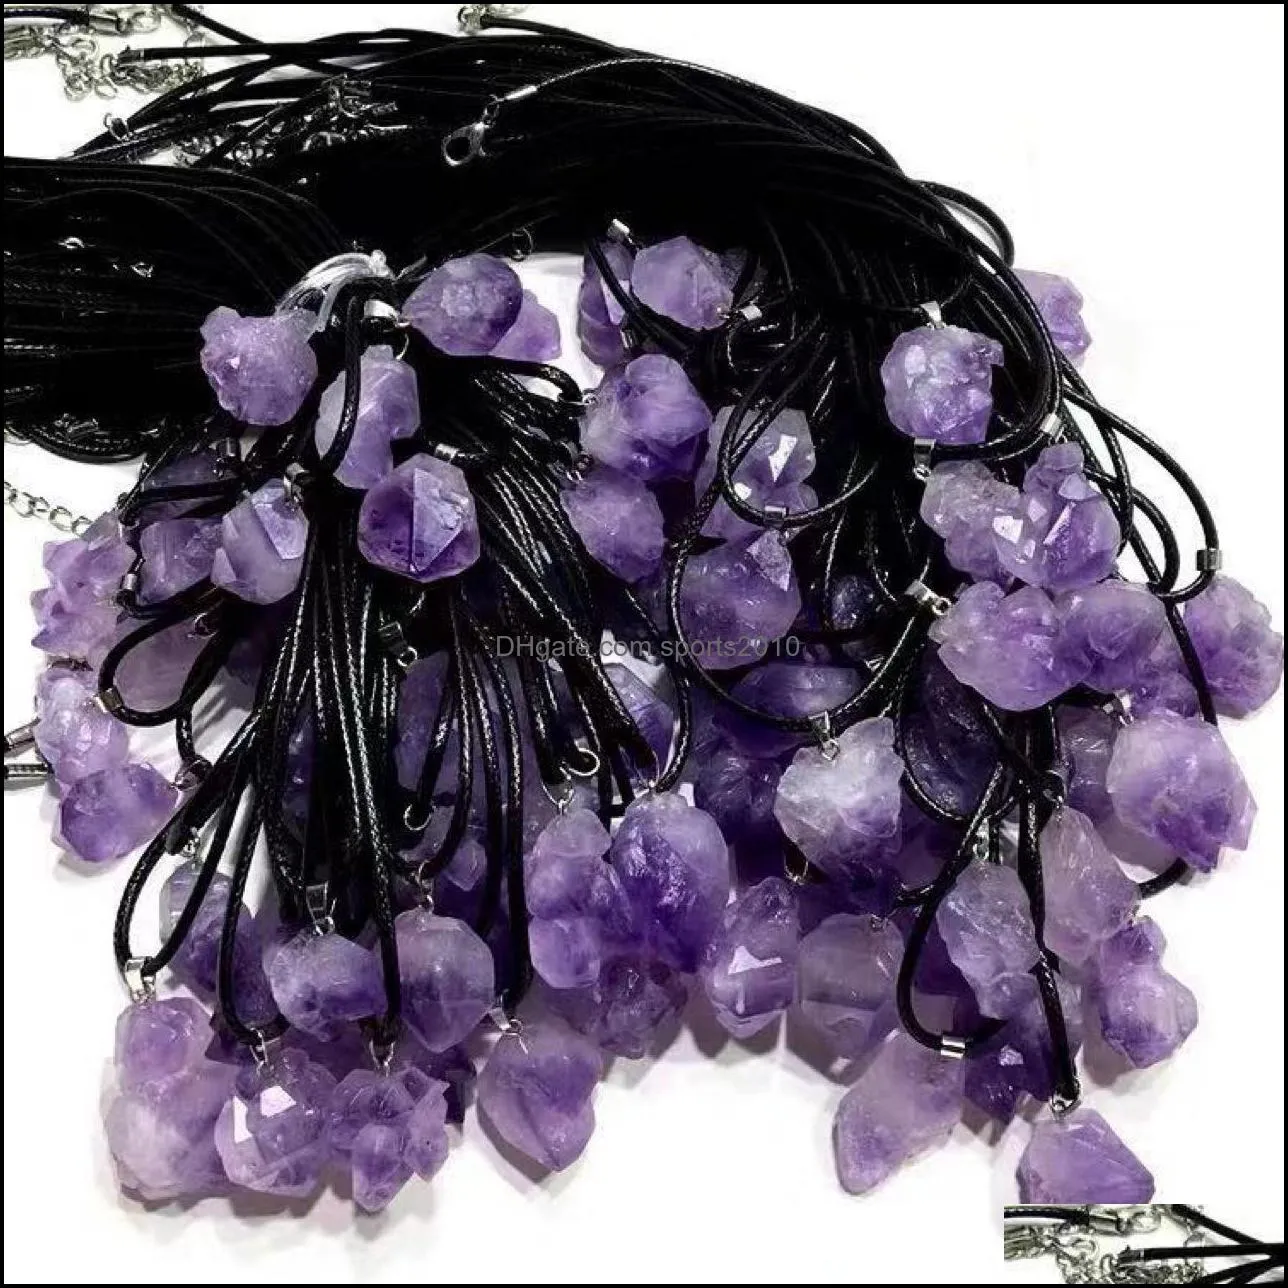 bulk natural yellow crystal stone fluorite charms amethyst irregular shape pendants for necklace earrings jewelry making sports2010